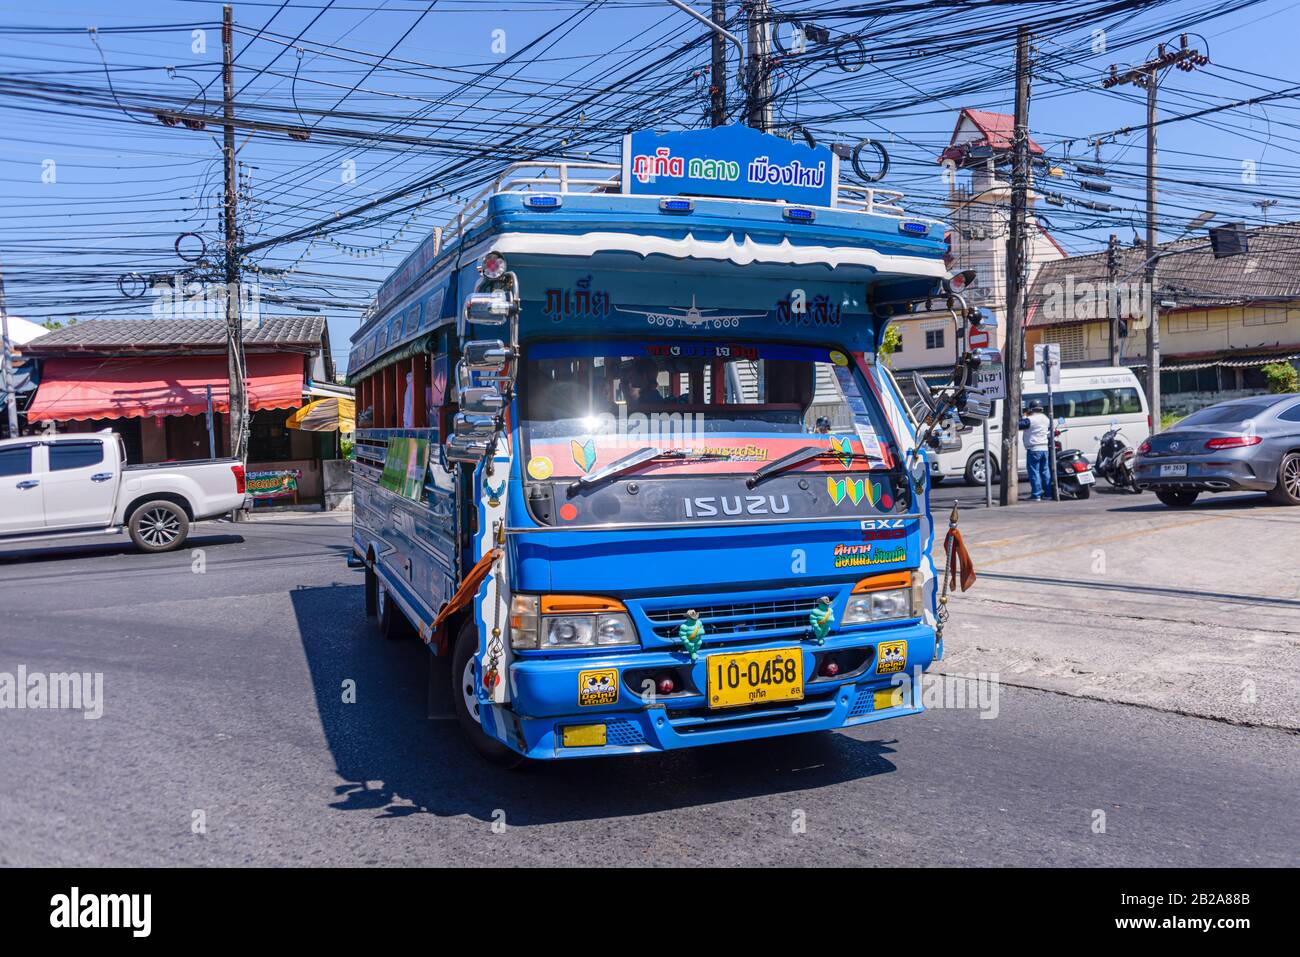 Phuket Bus High Resolution Stock Photography and Images - Alamy